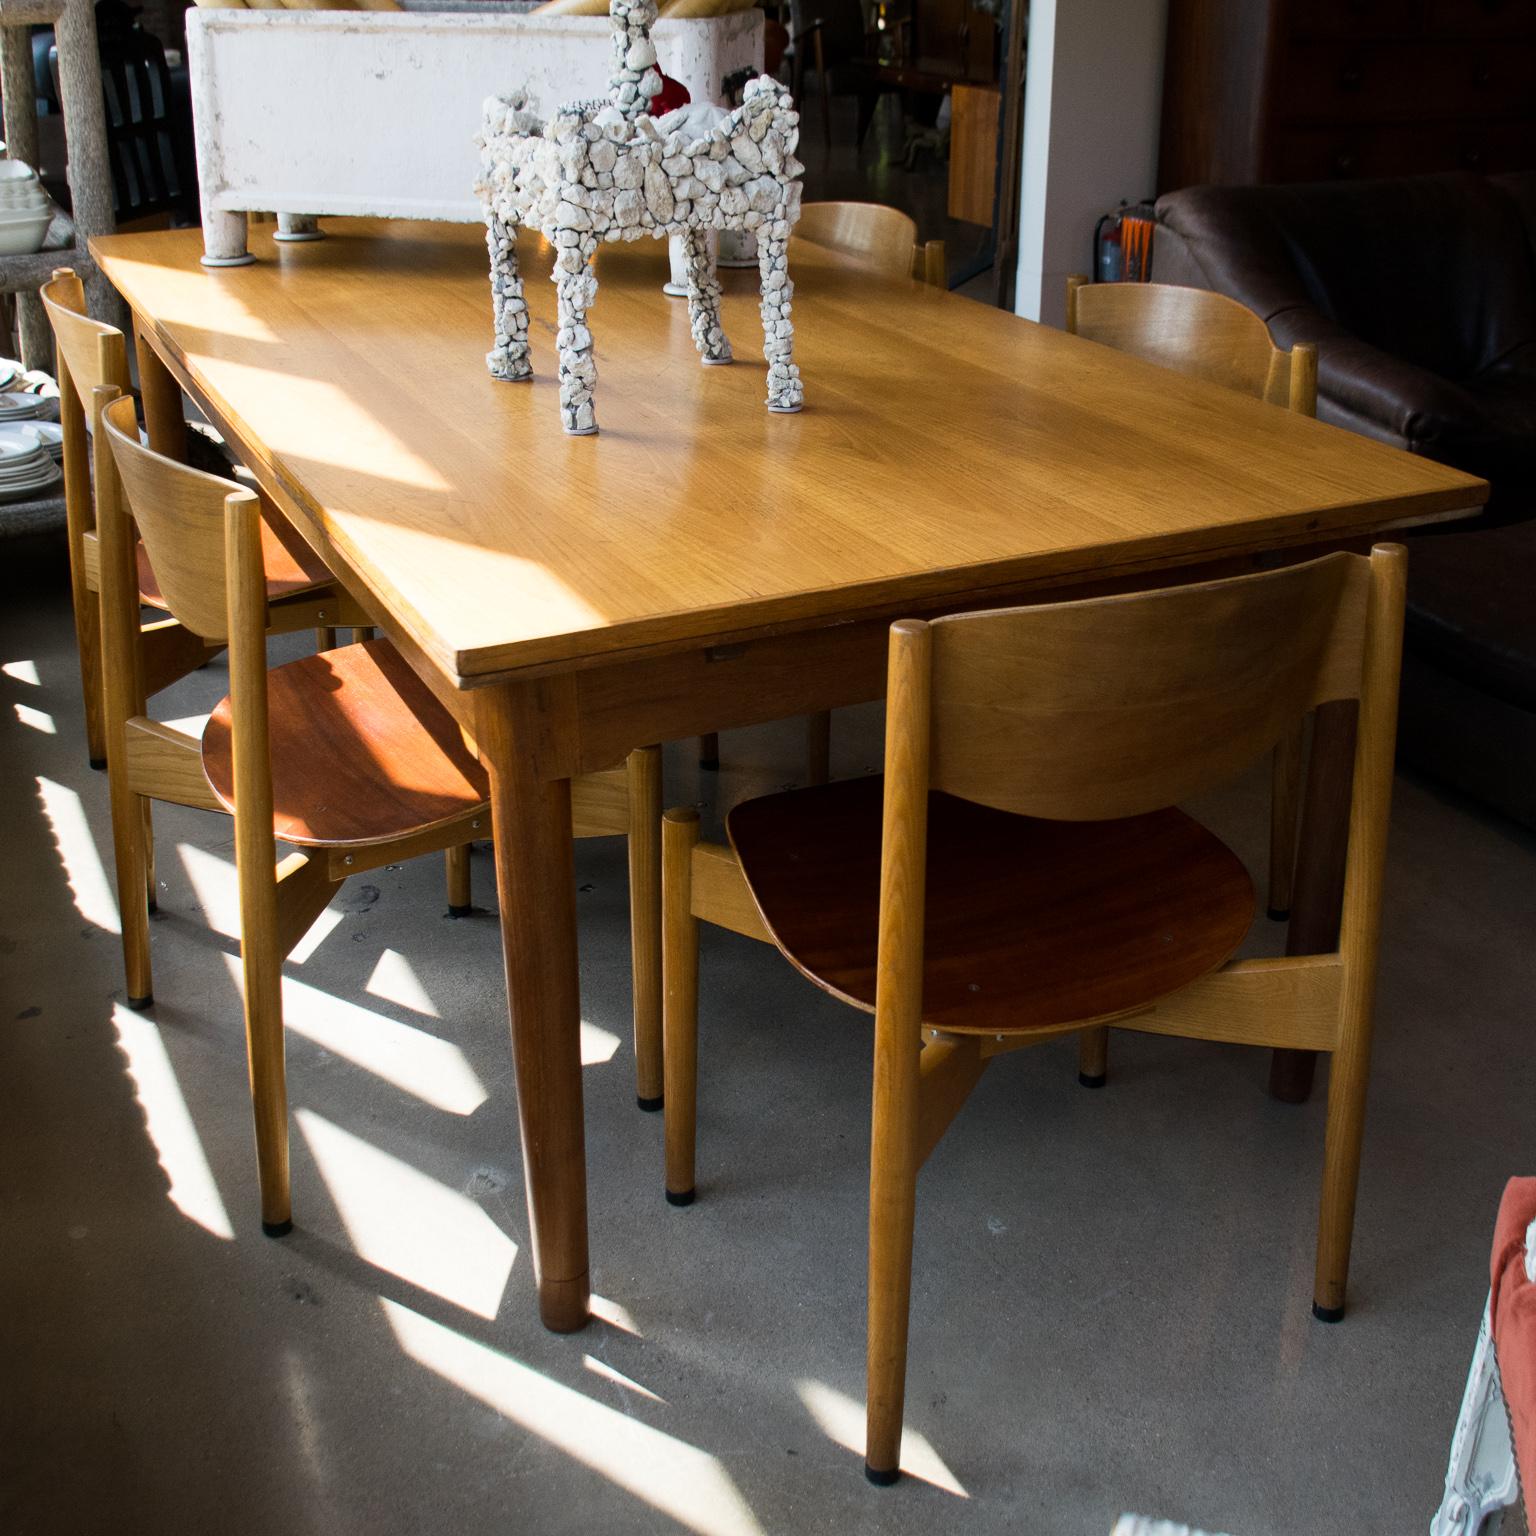 By influential Danish designer Jens Risom. Substantial and comfortable midcentury chairs with bentwood seats and backs. Dining height. Unique stacking chairs.